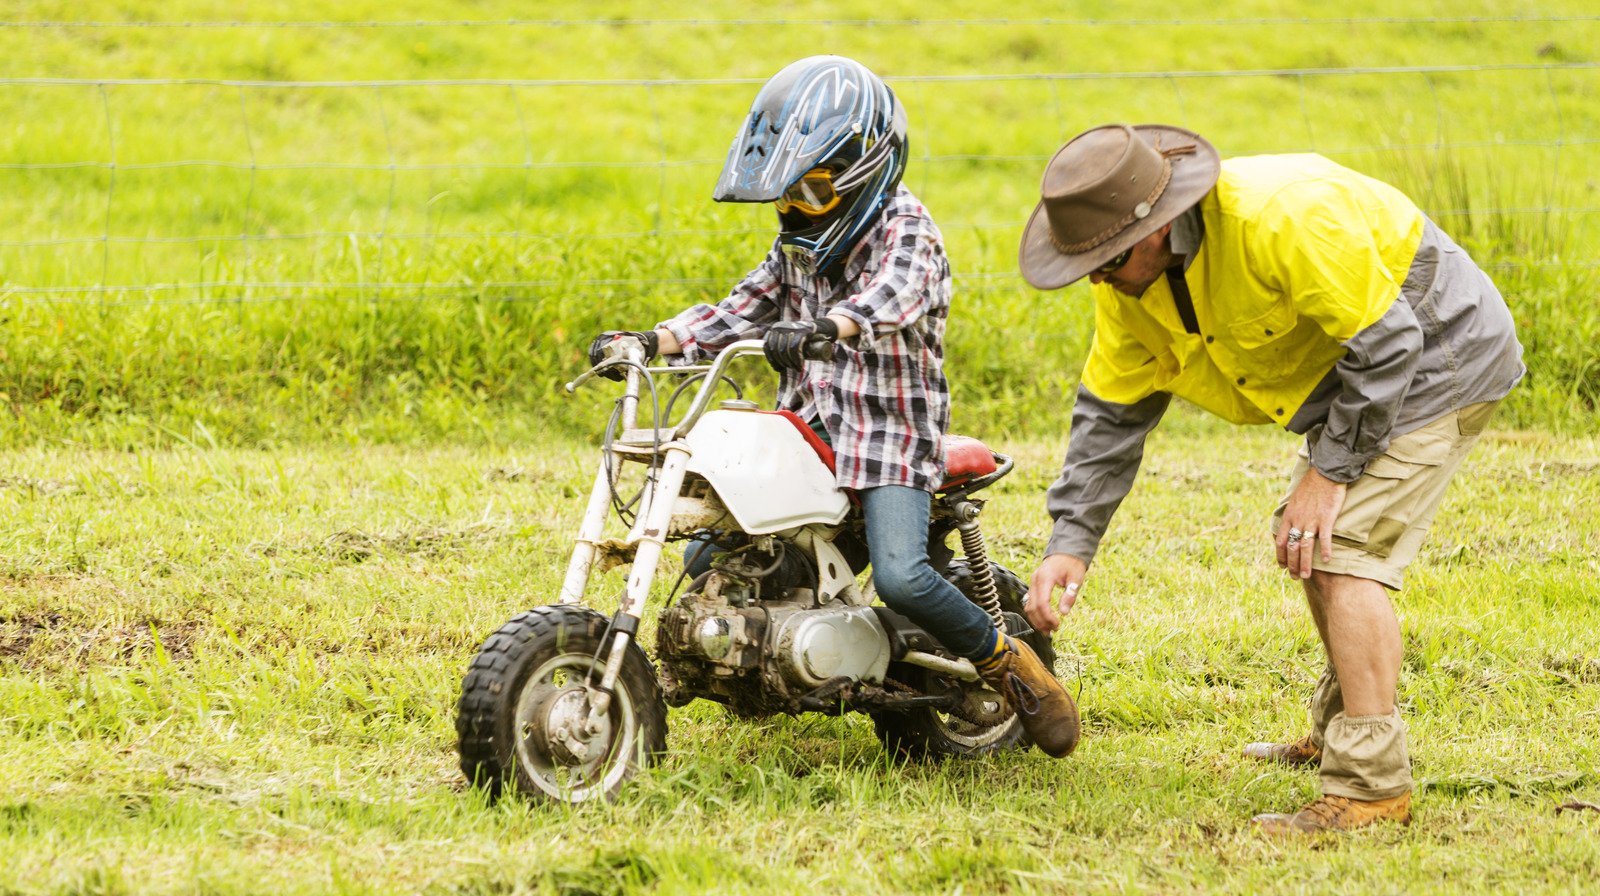 6 Kid-Sized Motorcycles Available From Major Retailers Even Toddlers Can Ride